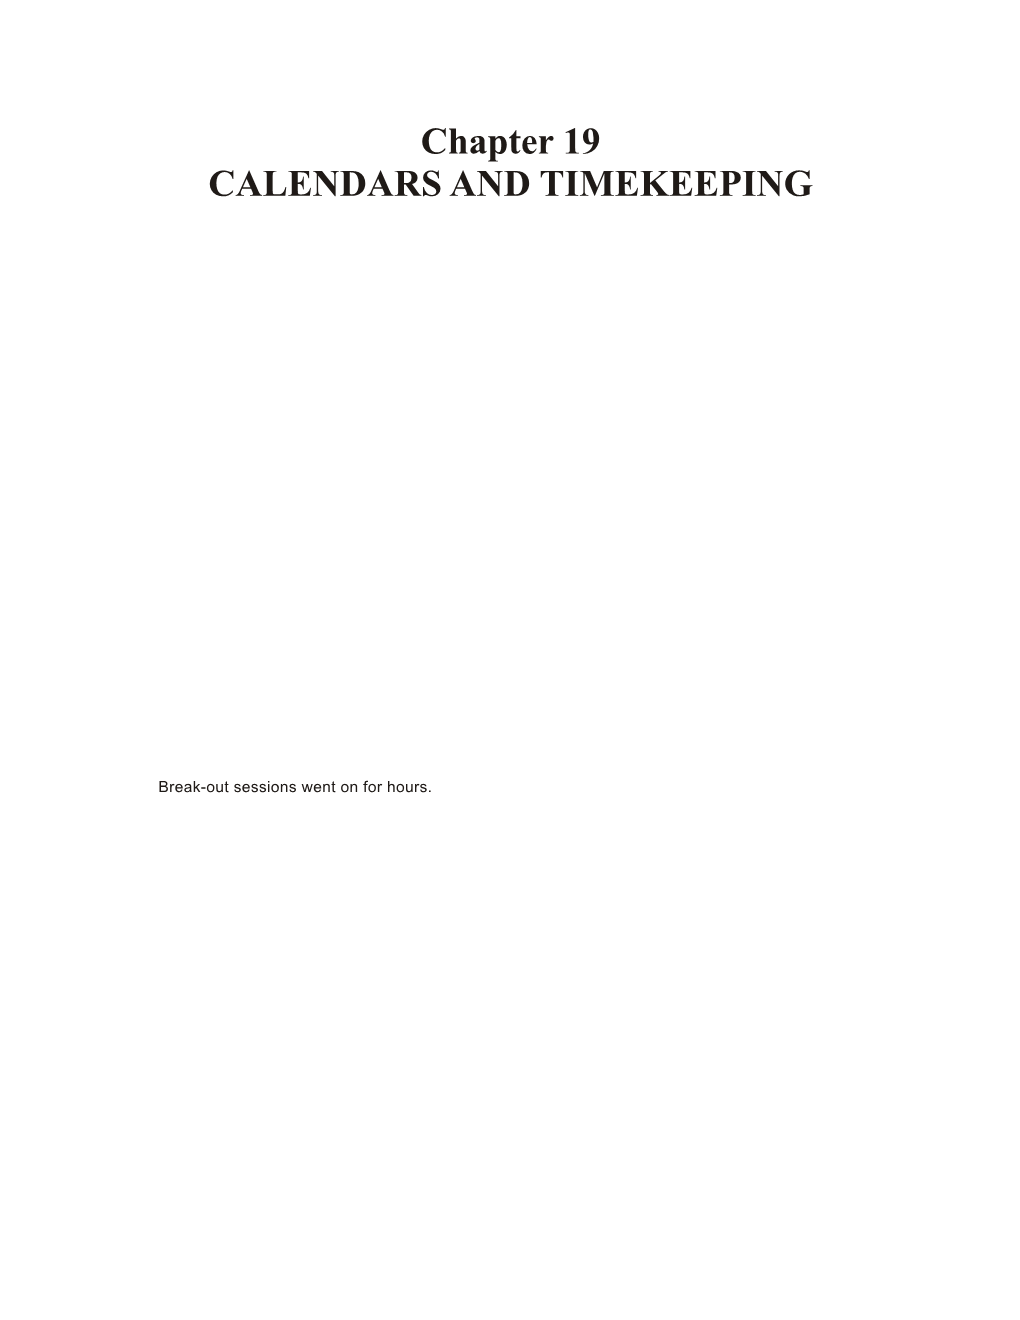 Chapter 19 CALENDARS and TIMEKEEPING